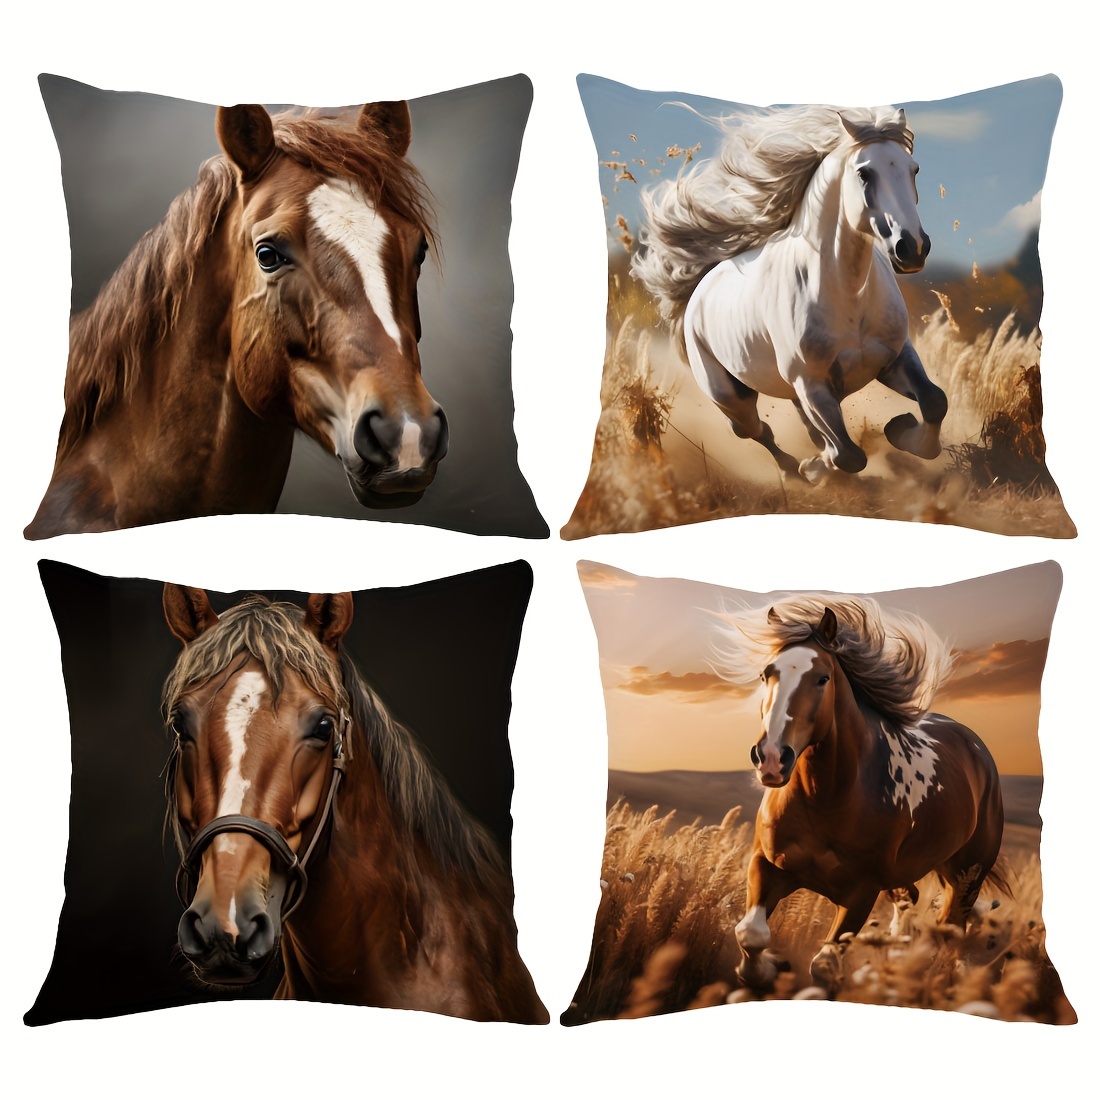 

4pcs Horse Photo Print Cushion Covers Set, 17.7inch, Peach Skin Velvet, Contemporary Style, Comfortable Decorative Pillowcases For Living Room Bedroom Sofa